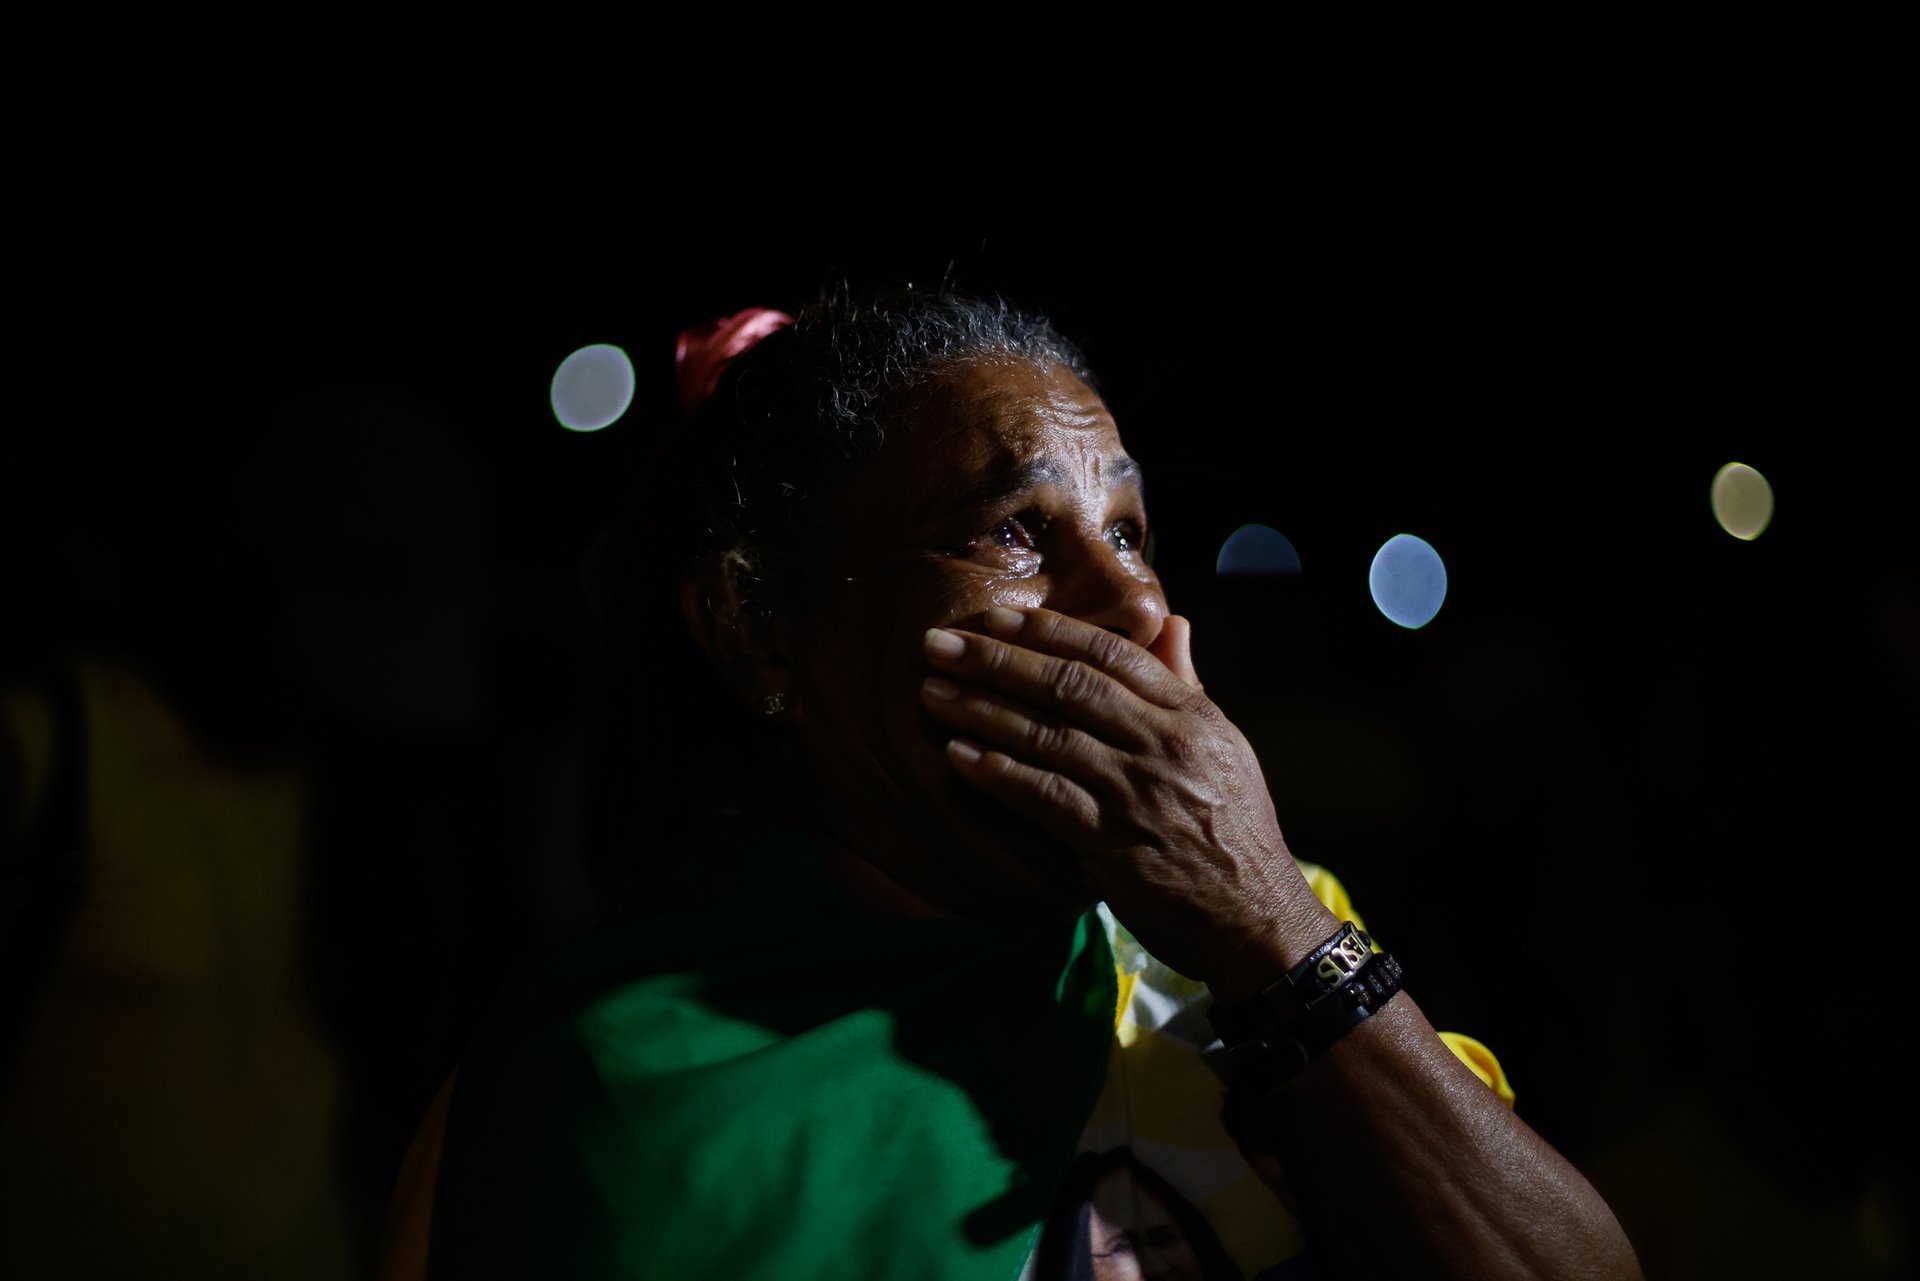 A Bolsonaro supporter in tears after his defeat at the polls to Luiz Inácio Lula da Silva, in The Monumental Axis, Brasilia, Brazil. Jair Bolsonaro is the first Brazilian president to not win re-election since the adoption of the re-election model in 1998.&nbsp;